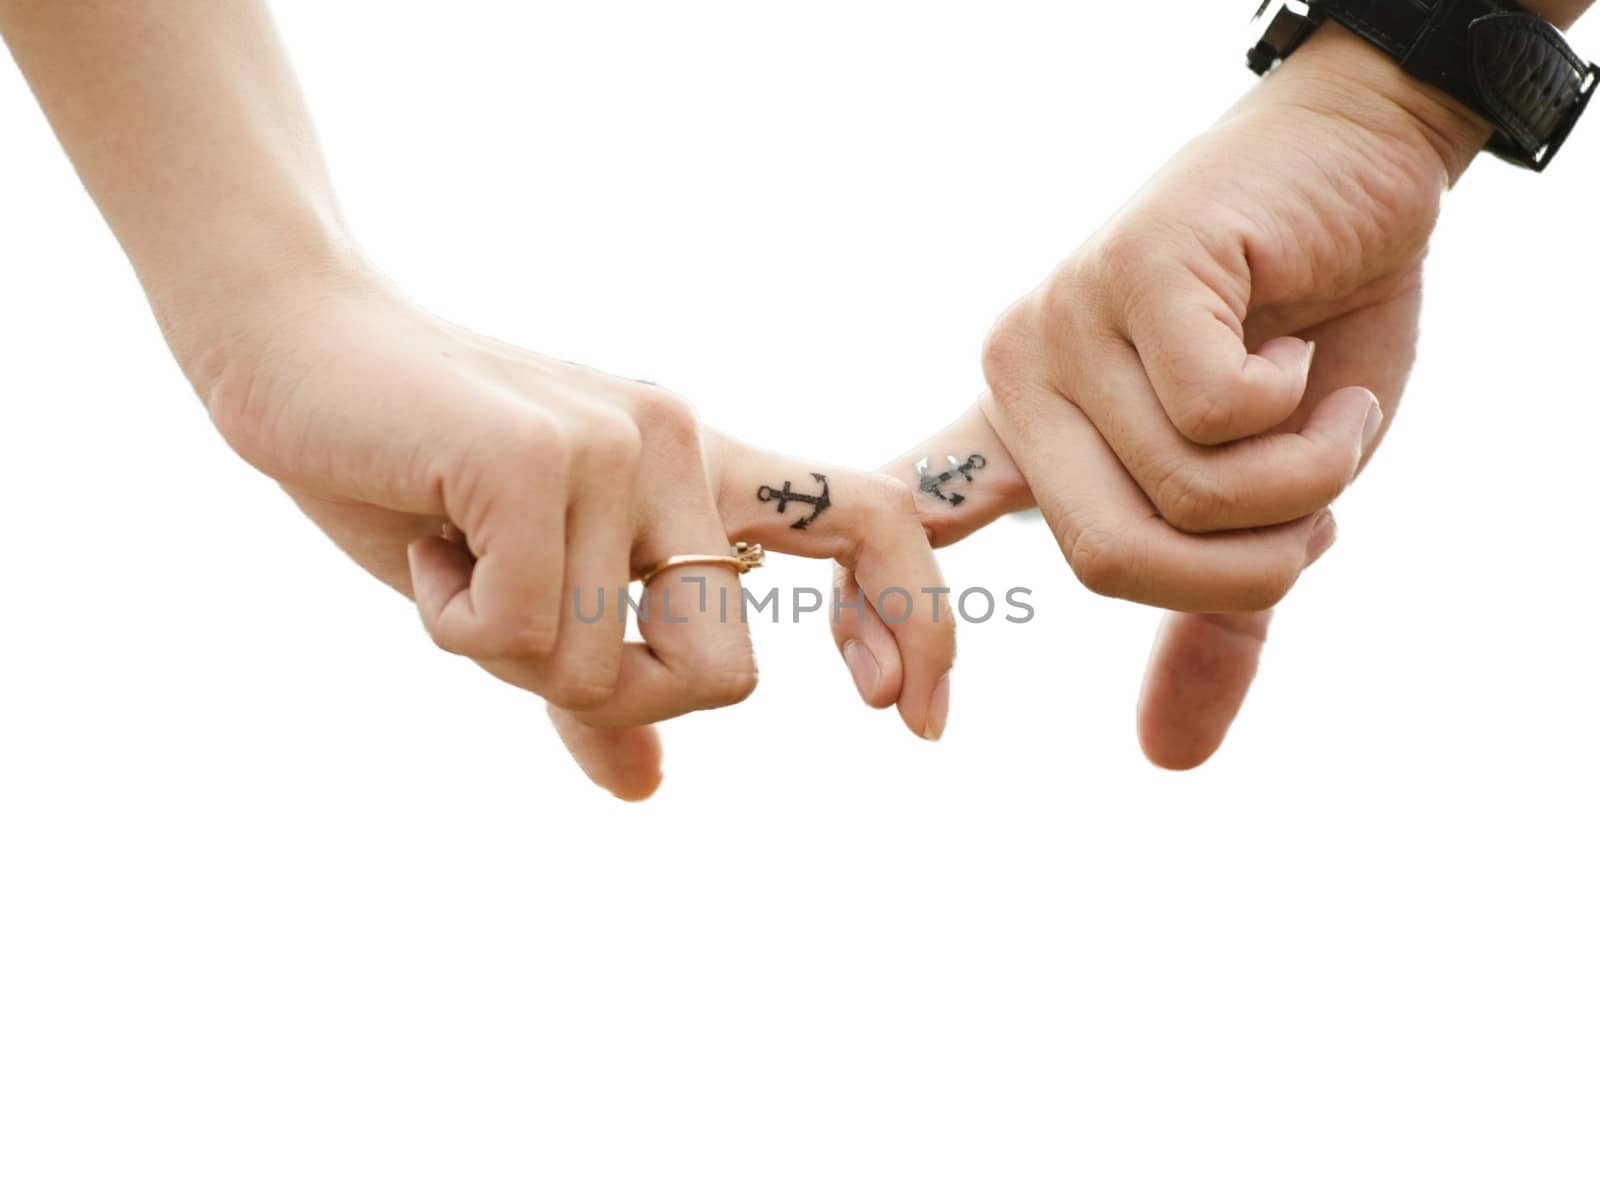 Couple in love hold each other's fingers as a symbol of their love by balage941